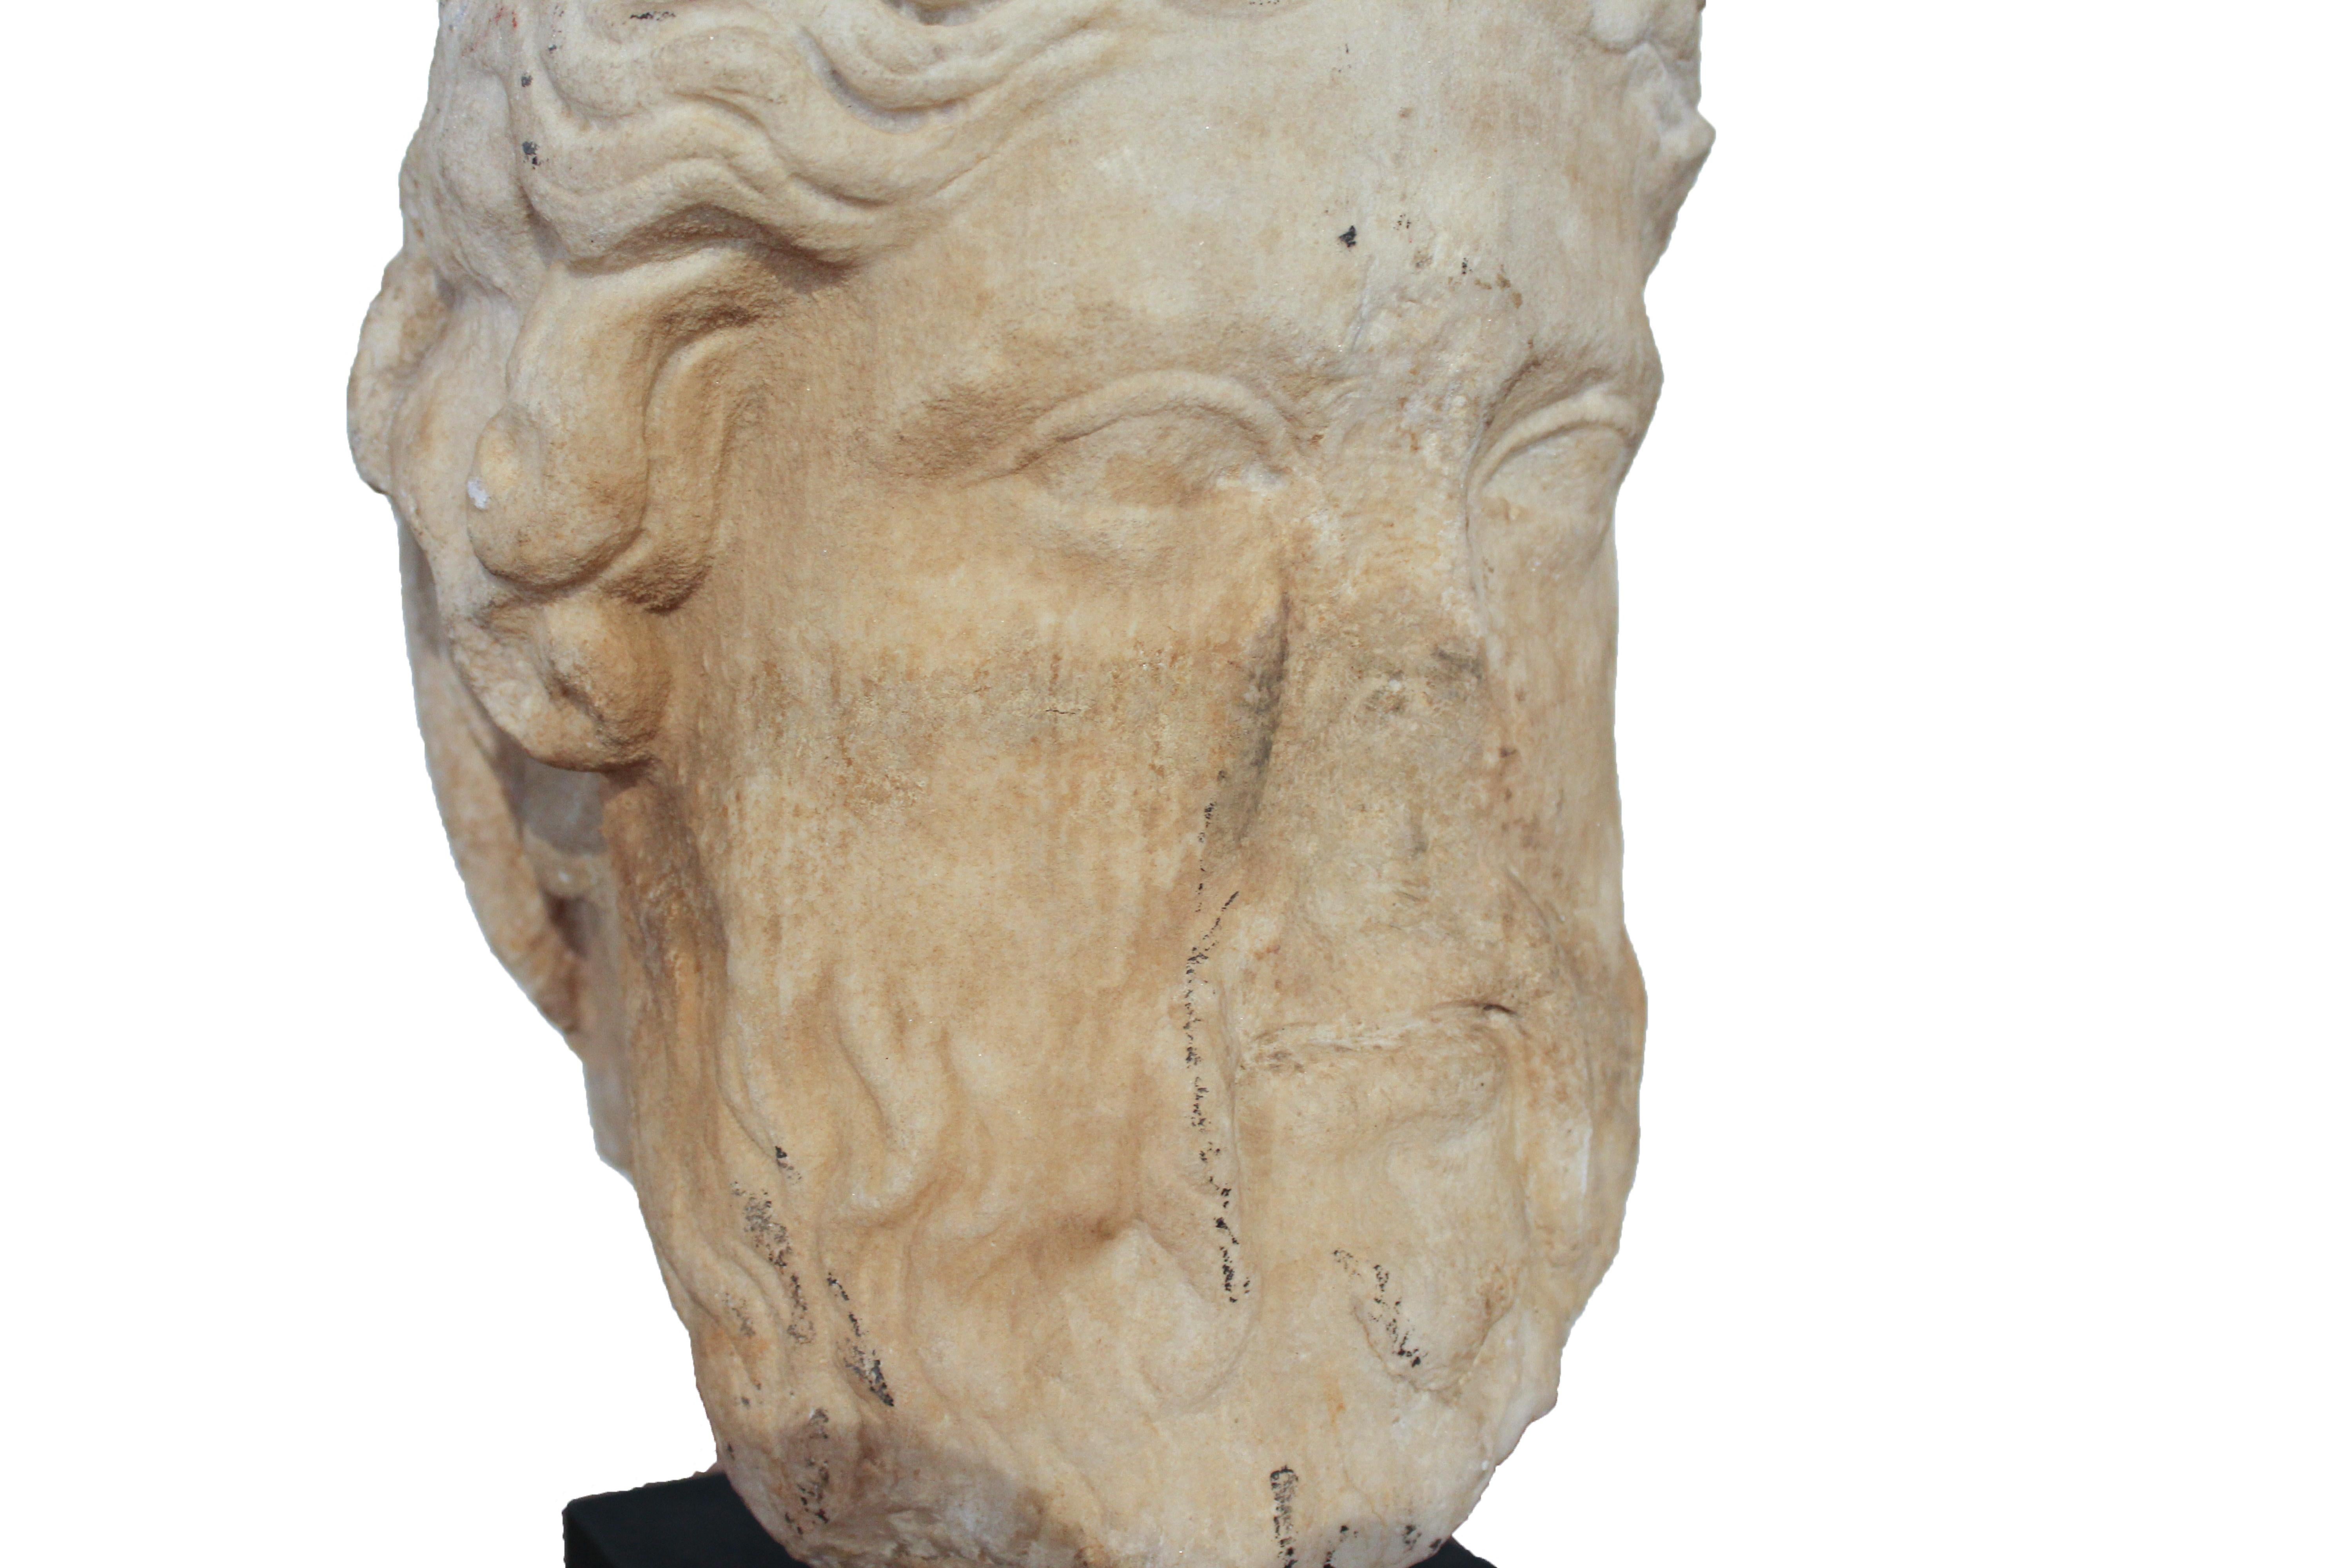 18th Century and Earlier Hermes Head Sculpture, 4th Century, Greece For Sale